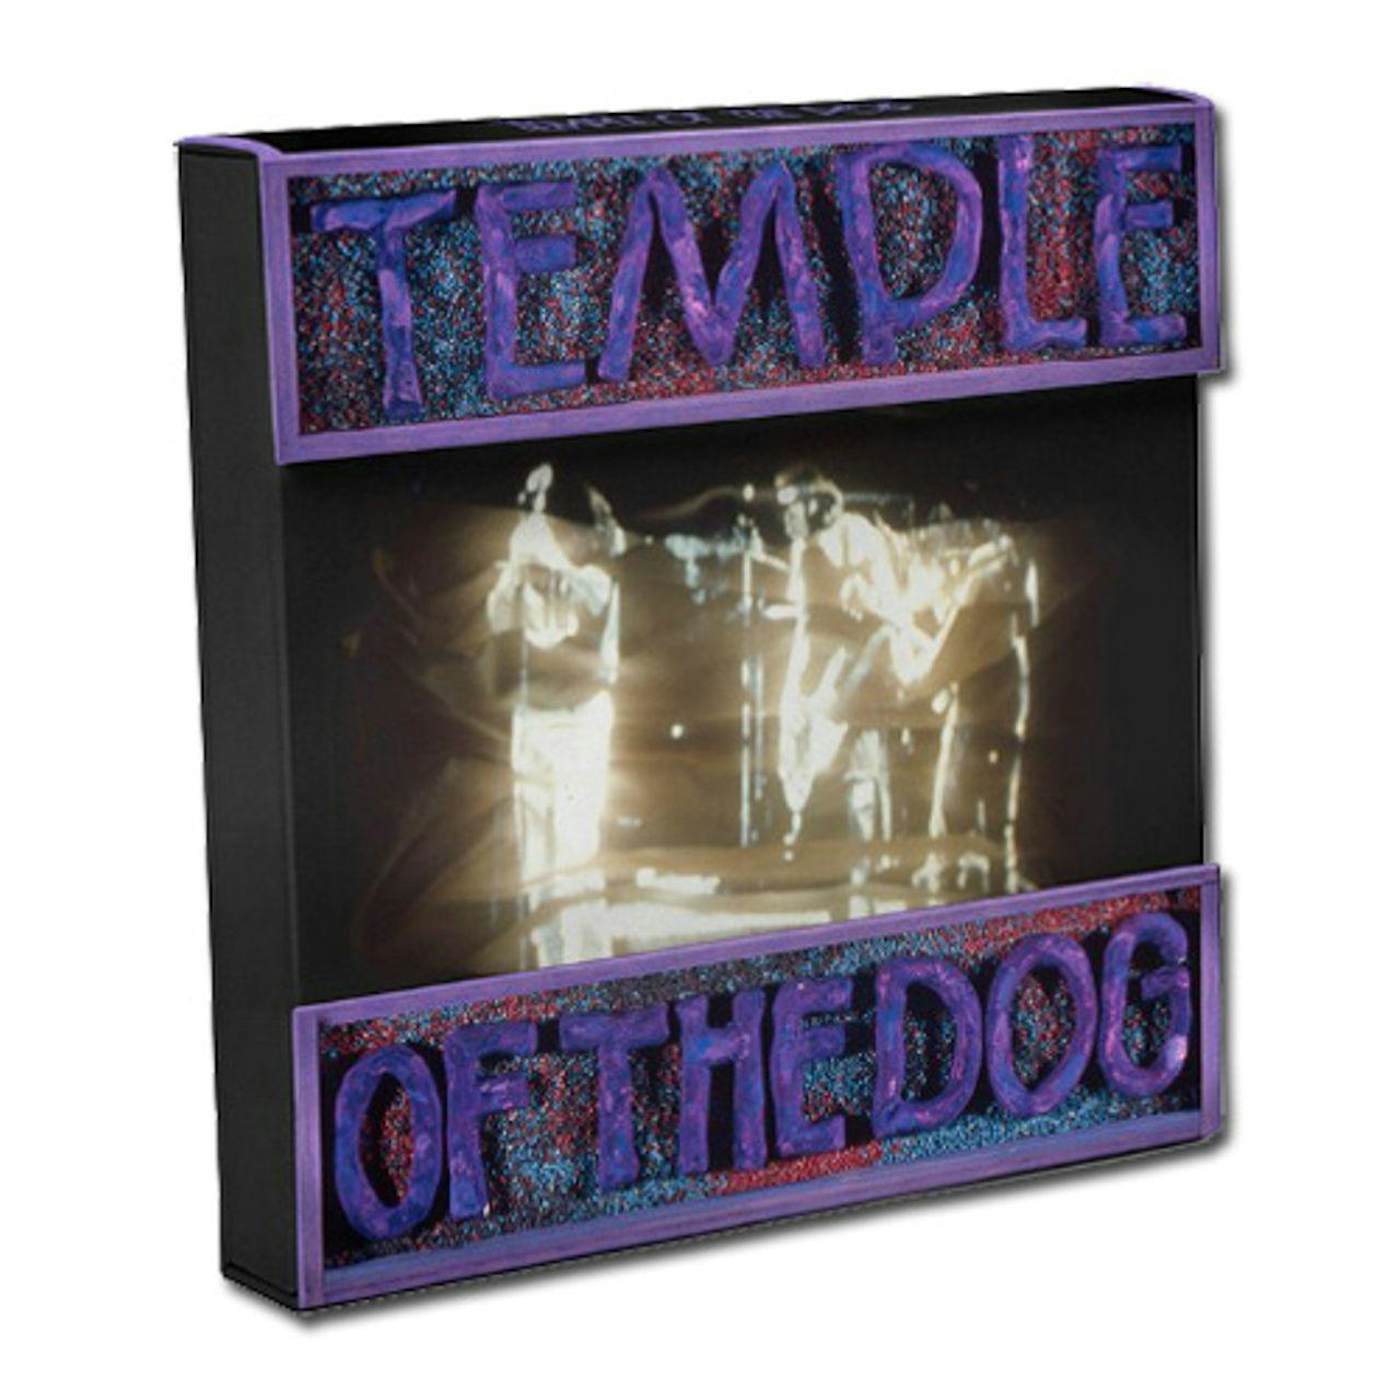 Temple Of The Dog Box Set CD